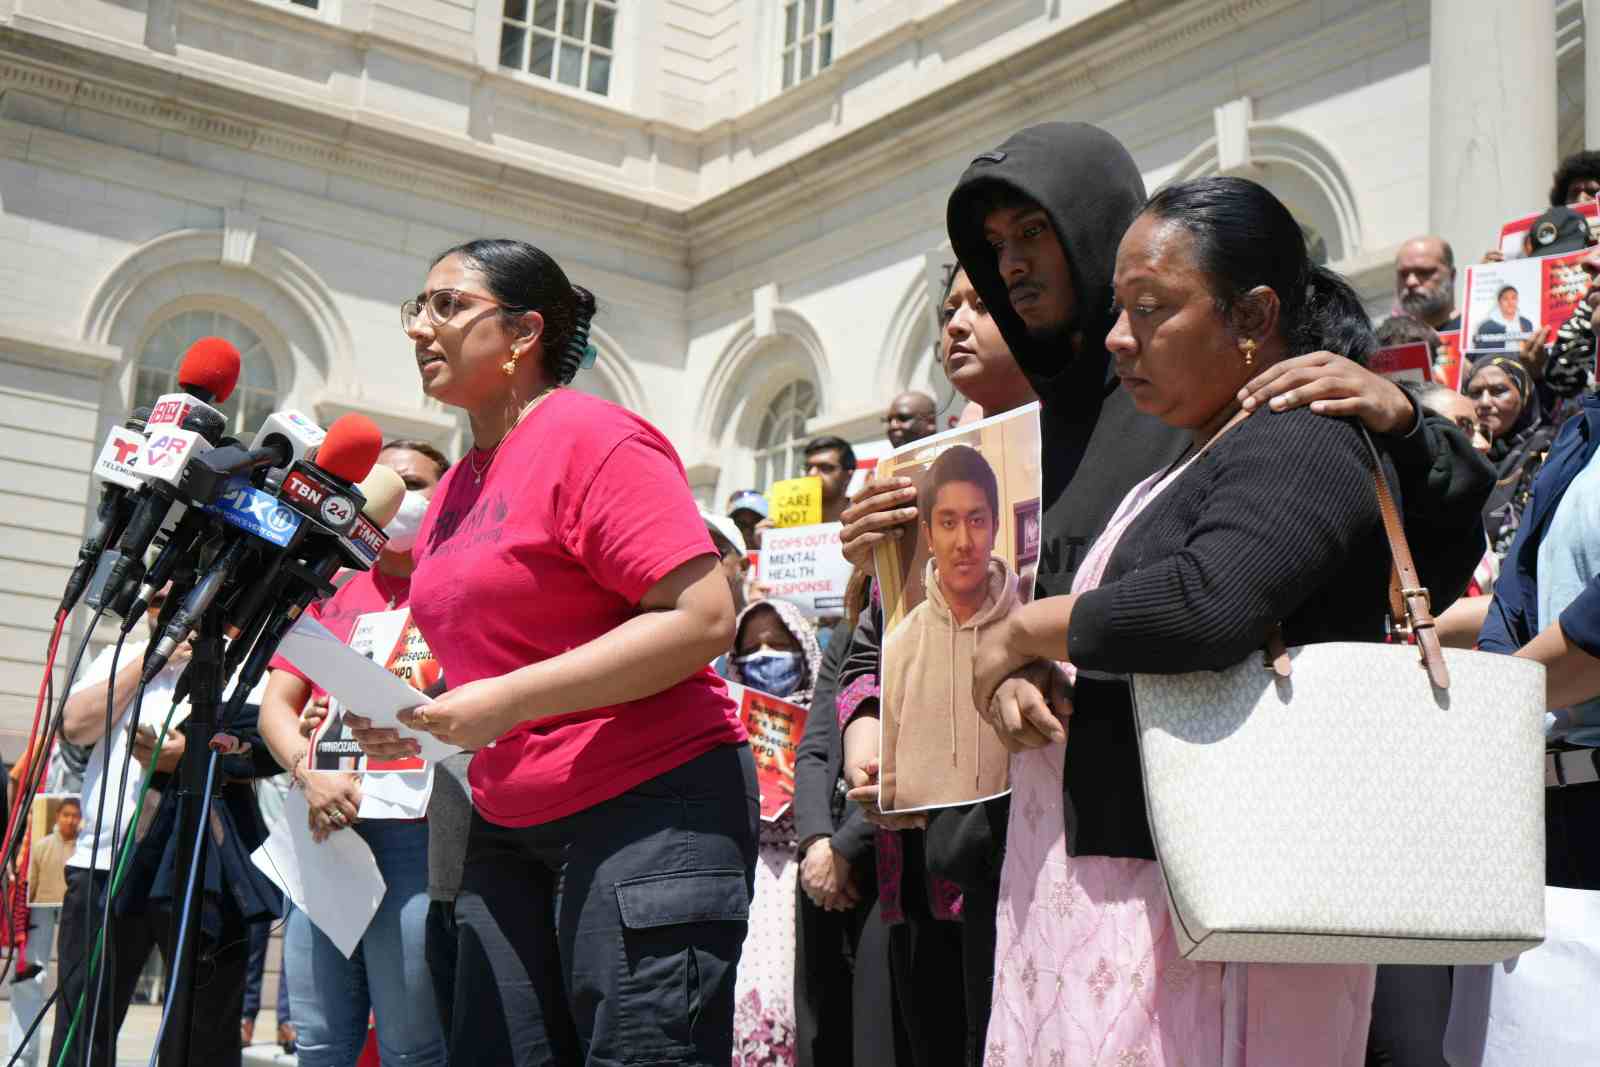 Win Rozario's mother and brother with community members at City Hall steps (Ayesha Le Breton for The Juggernaut)